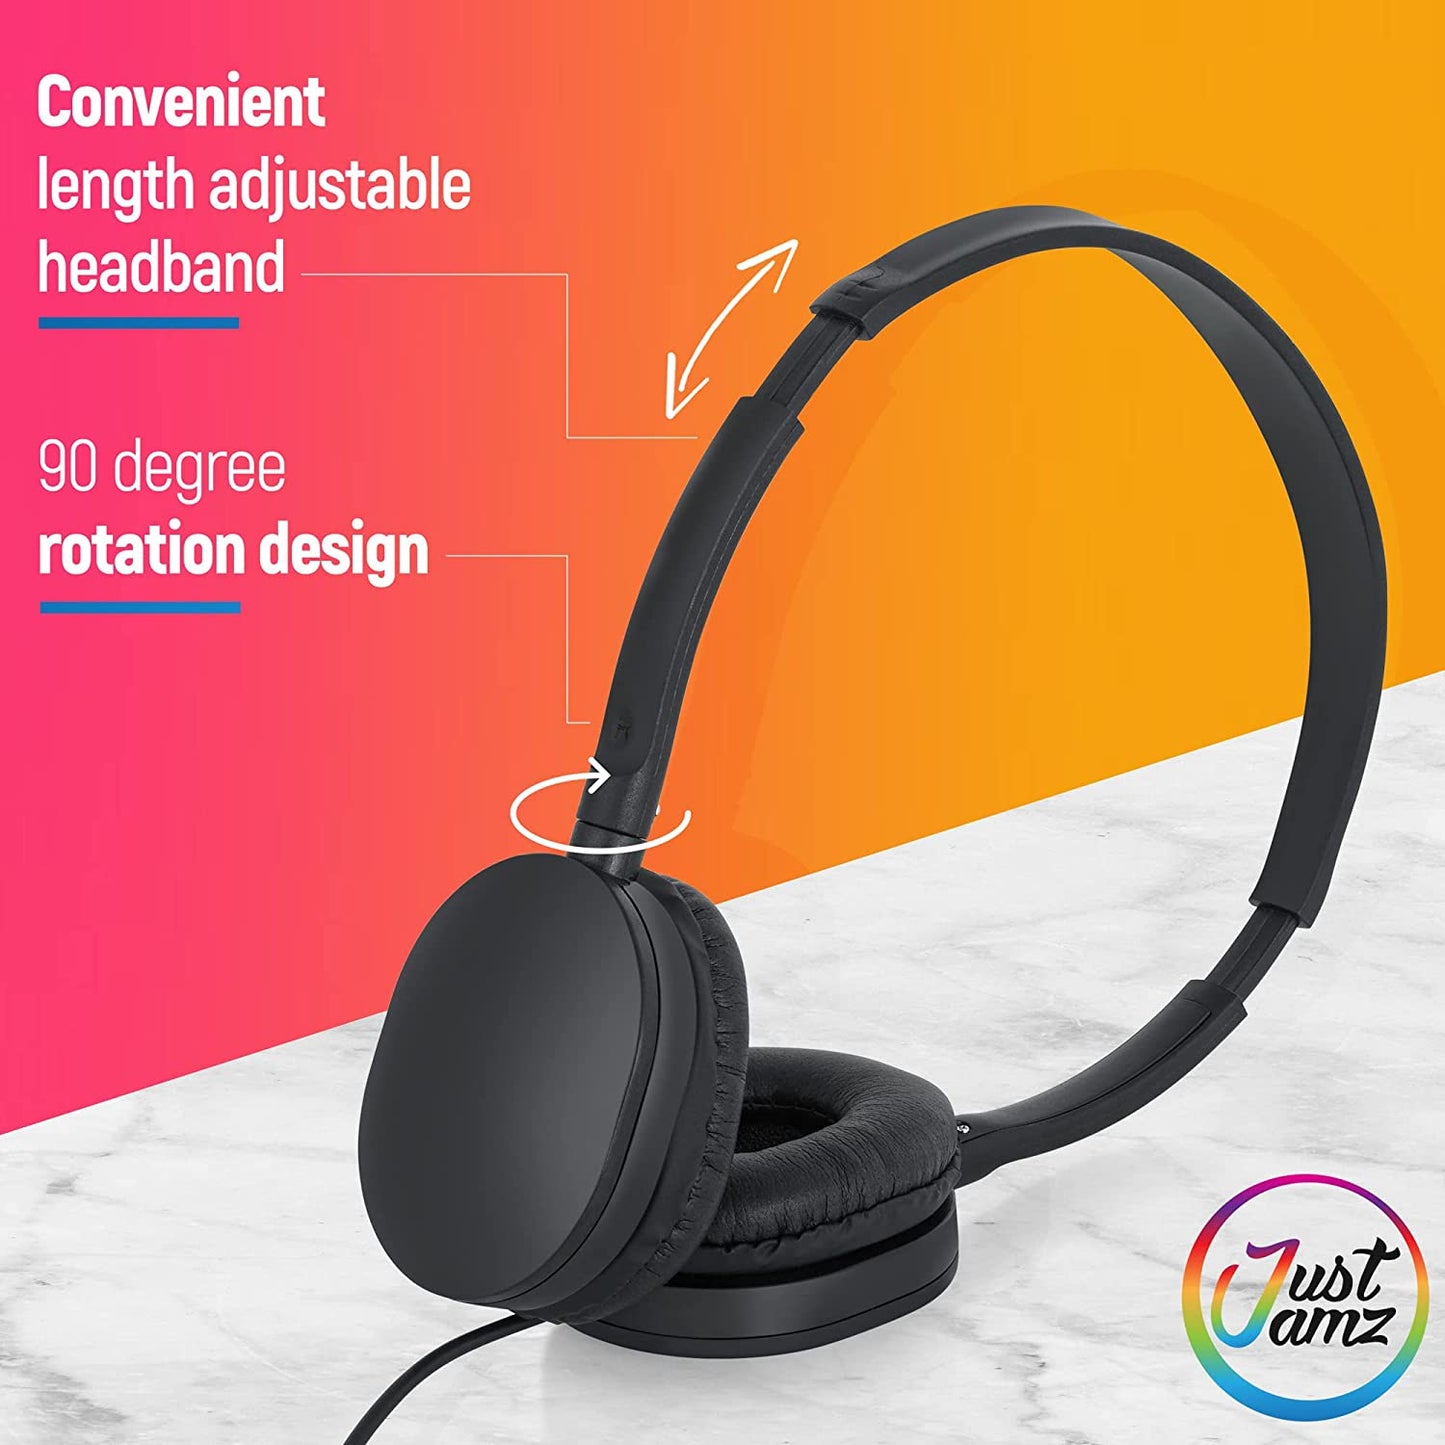 JustJamz® Headphones | 30 Pack | Wholesale Bulk Headphones | Headphones with Microphone | Bulk Over-Ear Headphones with Mic | Foldable with Soft Leather Cushion | HQ Stereo Sound 3.5mm Jack (Black)